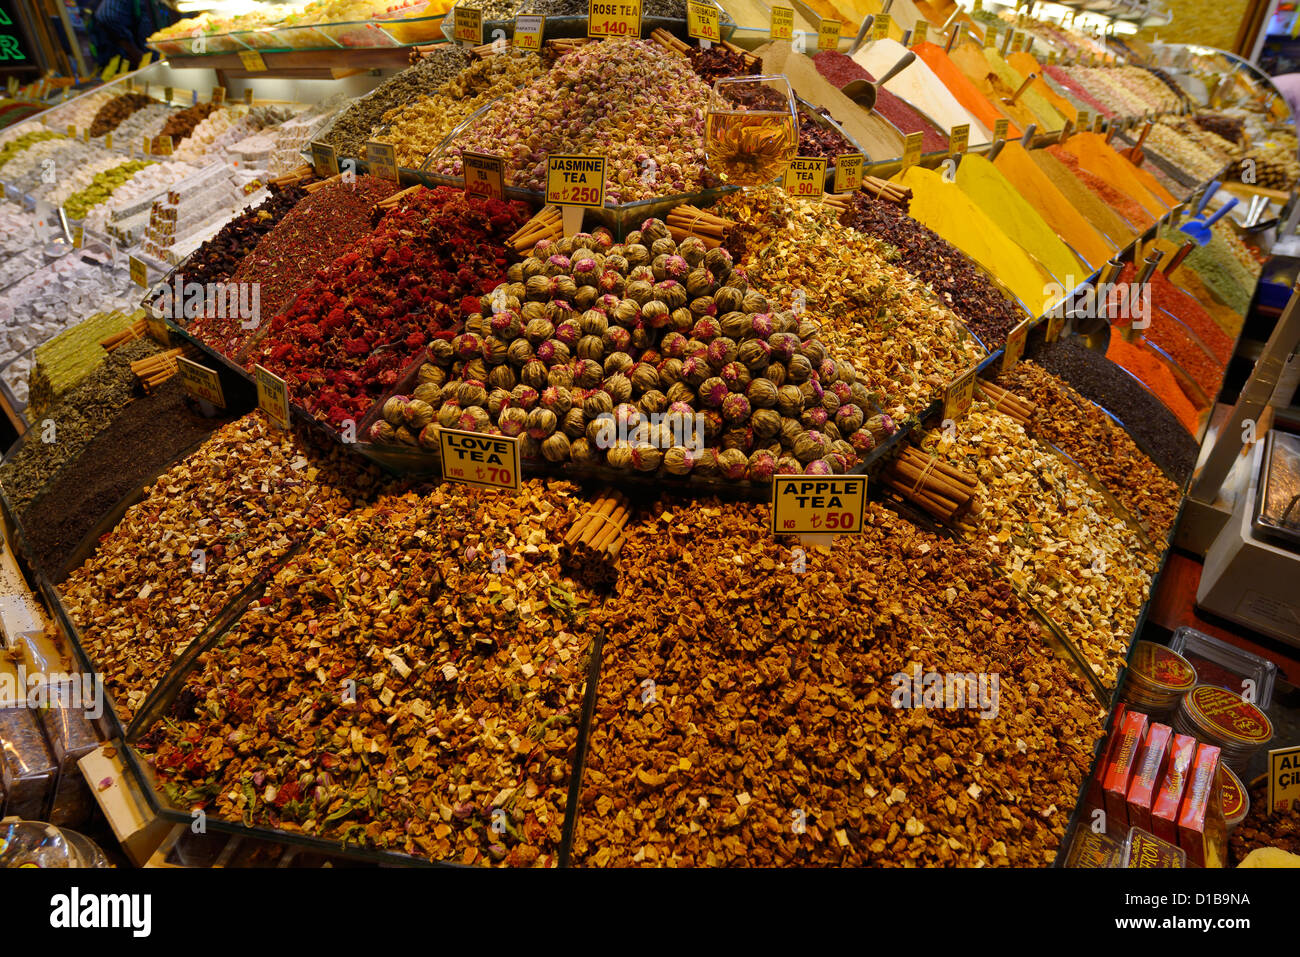 Love tea among other flavours with spices and Turkish Delight in the Egyptian Spice Bazaar Eminonu Fatih Istanbul Turkey Stock Photo